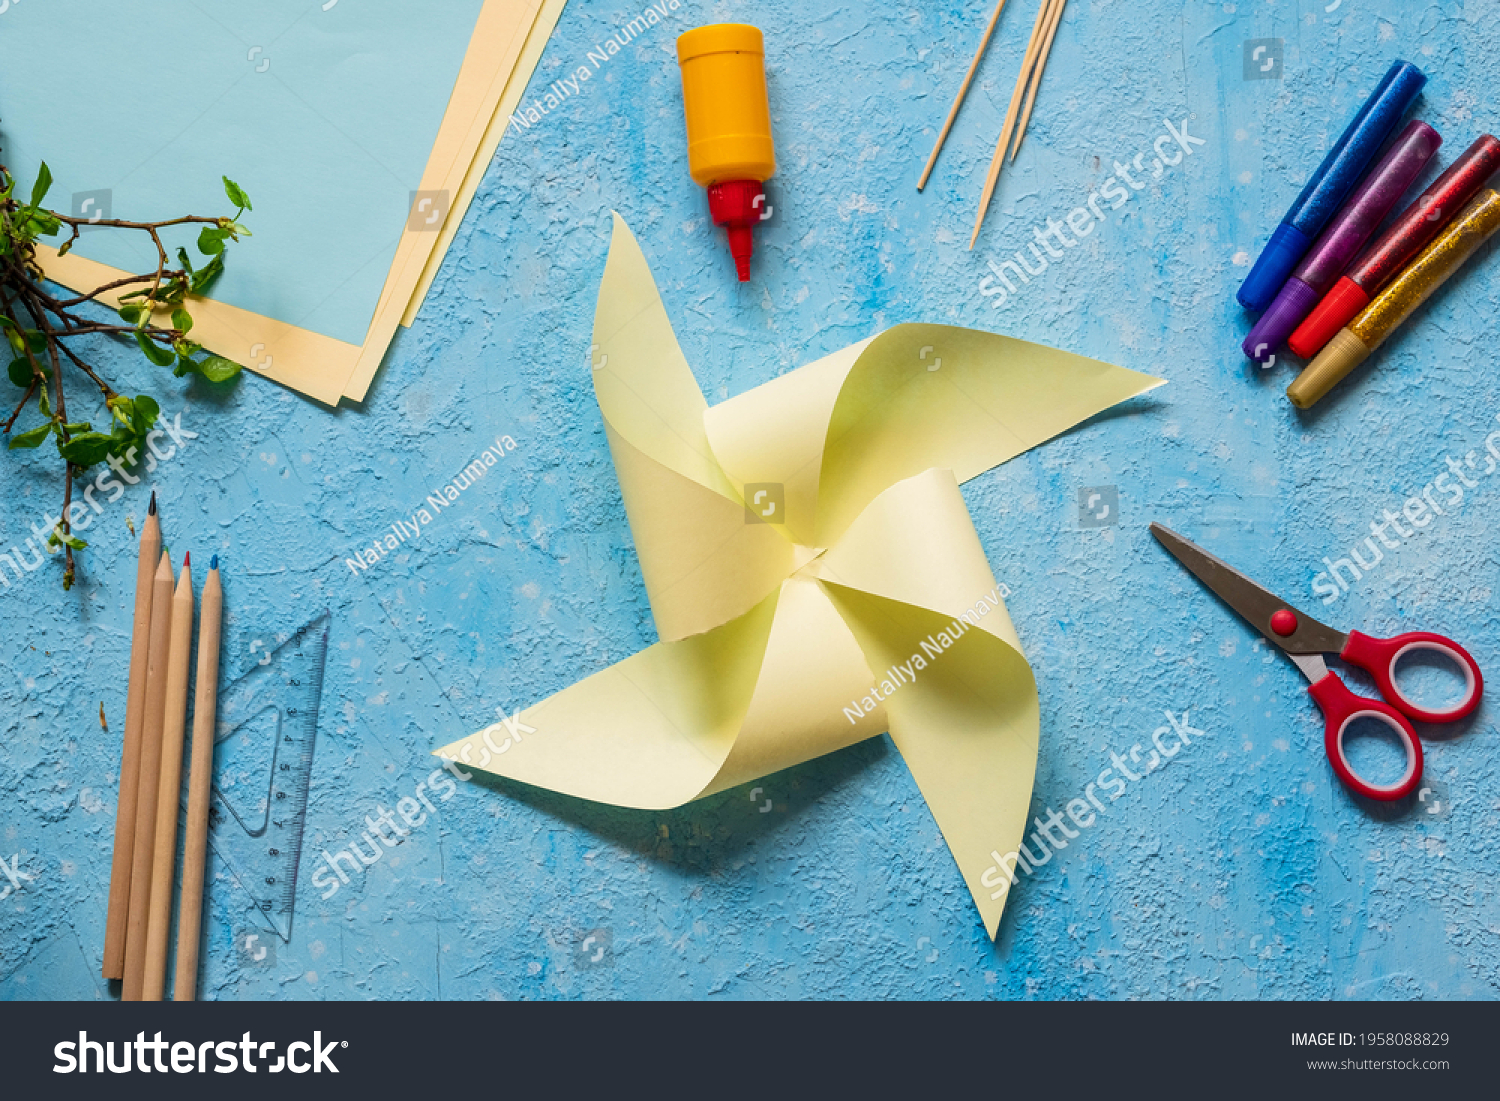 Step-by-step making of a paper weather vane by a child on a blue concrete background. Children's creativity, divas, crafts. Paper crafts #1958088829